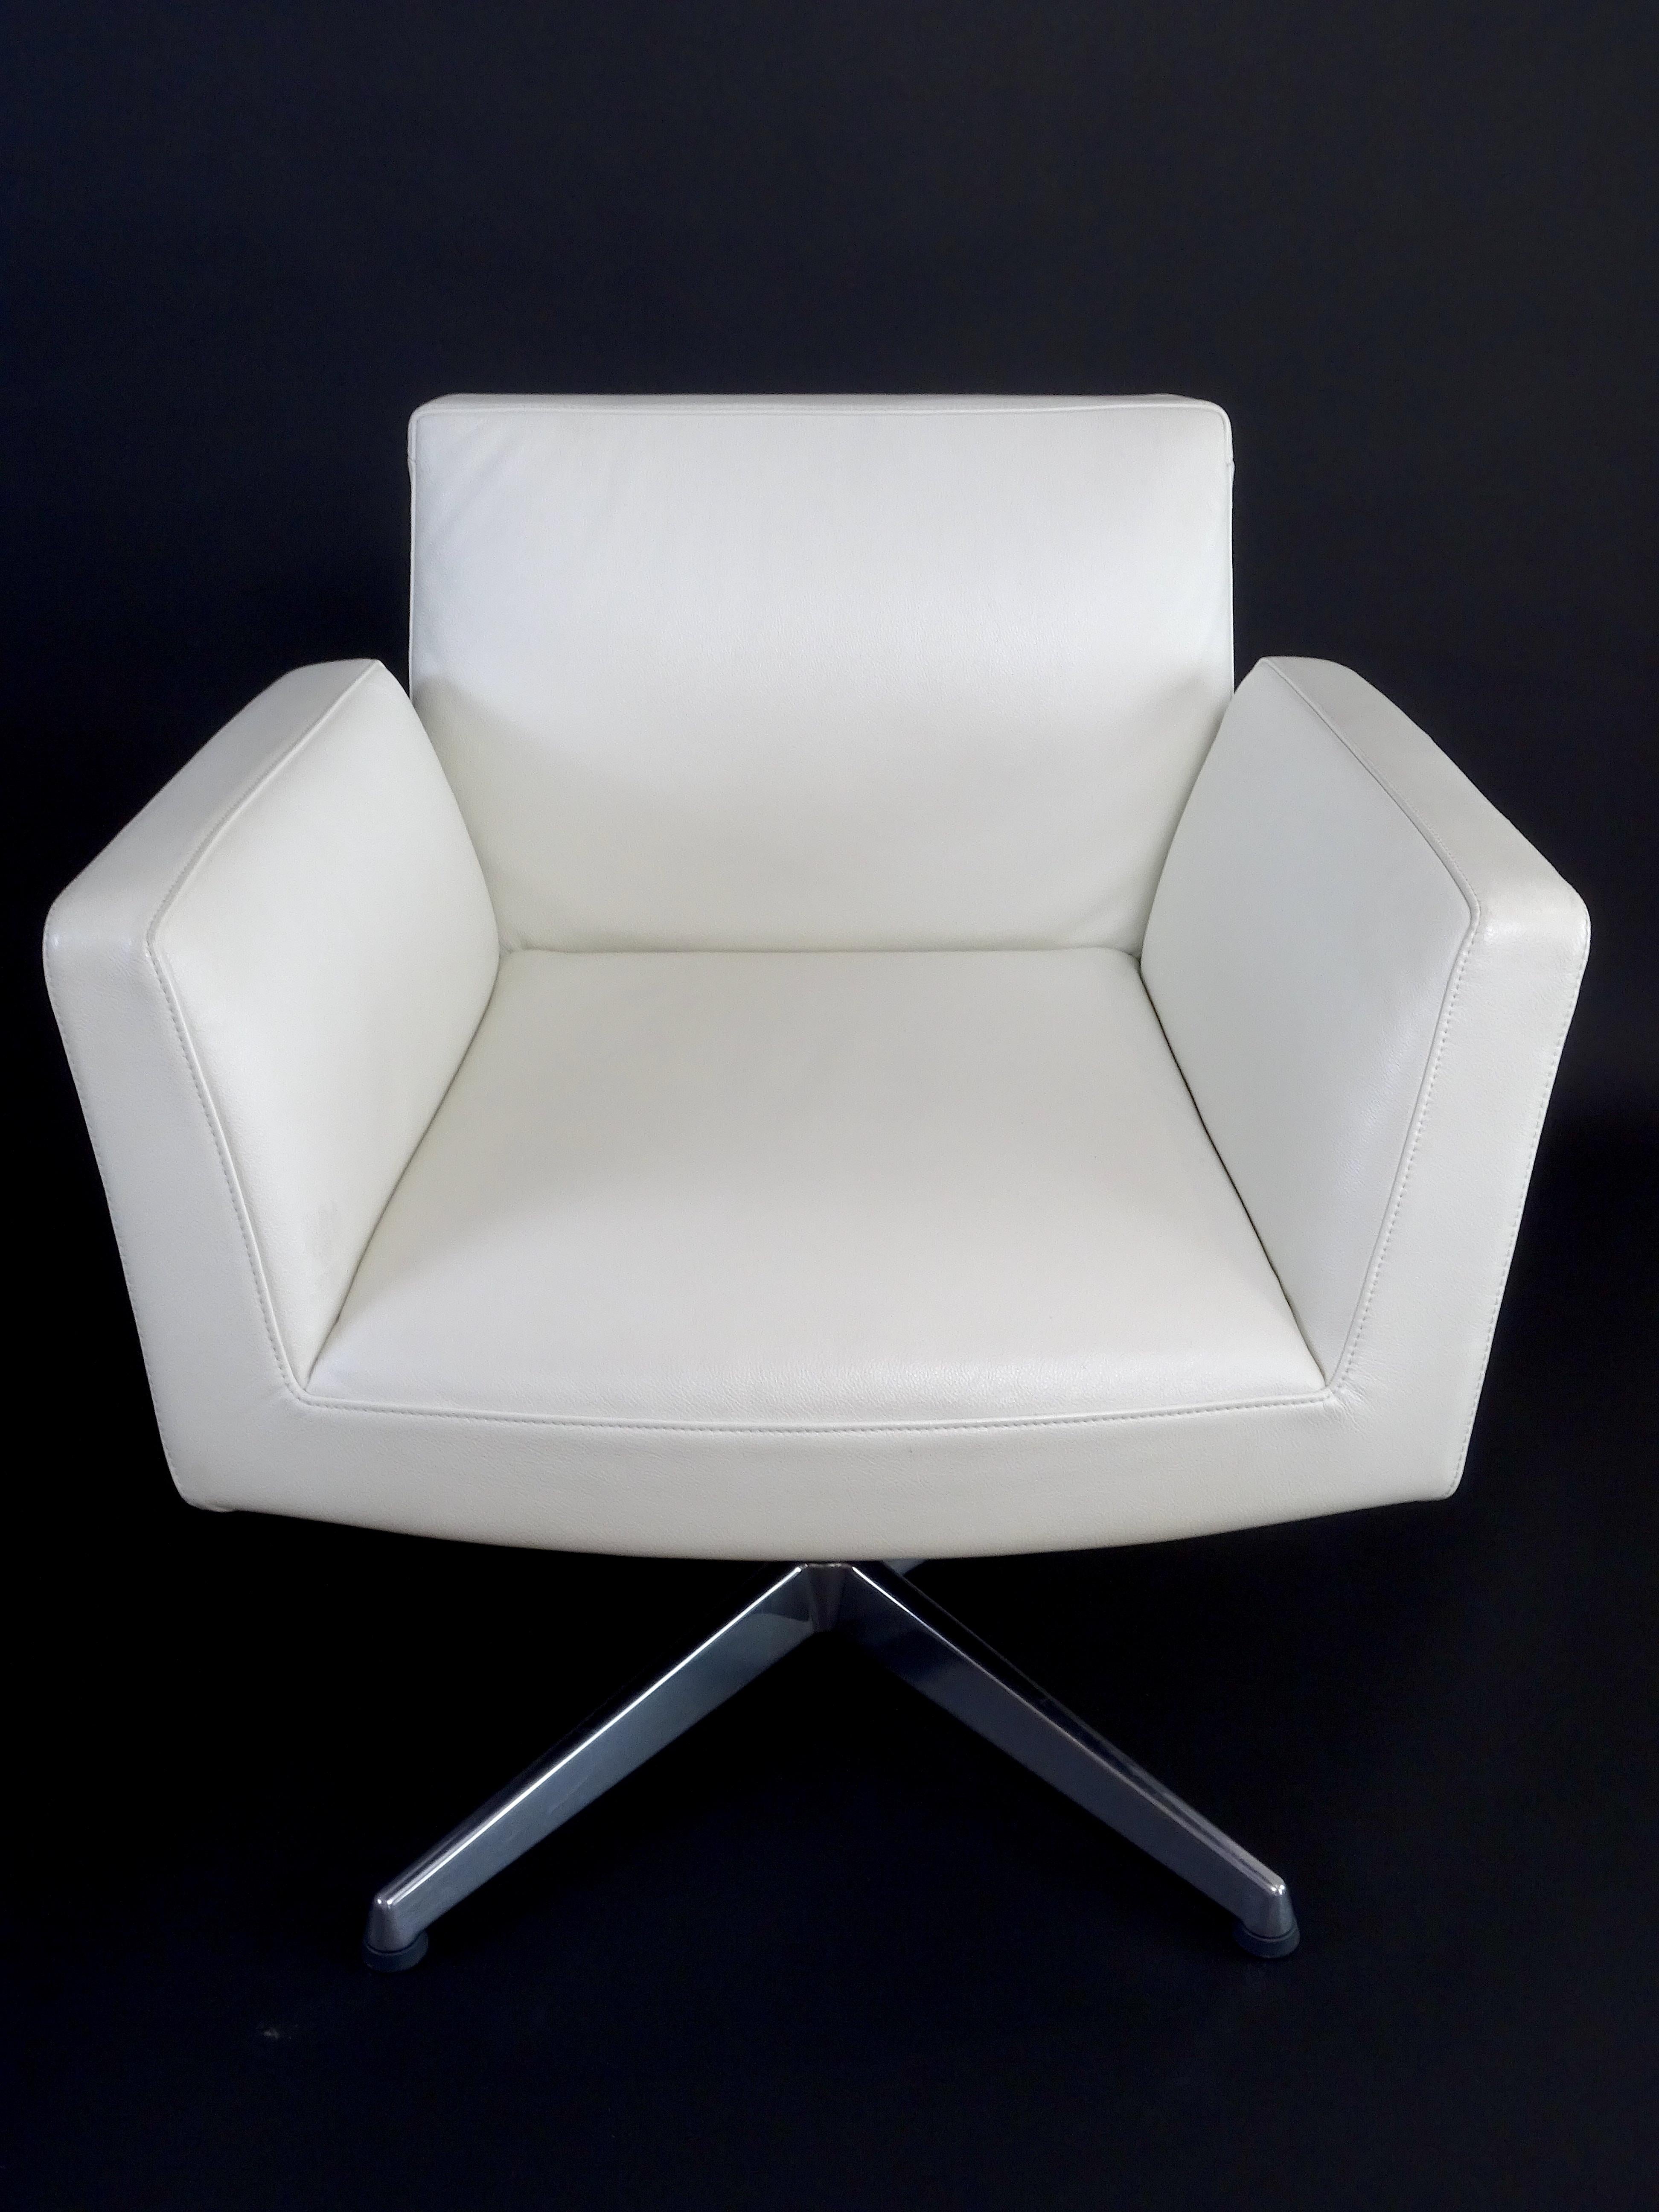 Set of two of office armchairs with armrests and 4 spokes, the upholstery is in white Poltrona Frau leather while the base is made of polished aluminium. 

There is a swivel mechanism and an internal bearing that guarantees the return to the